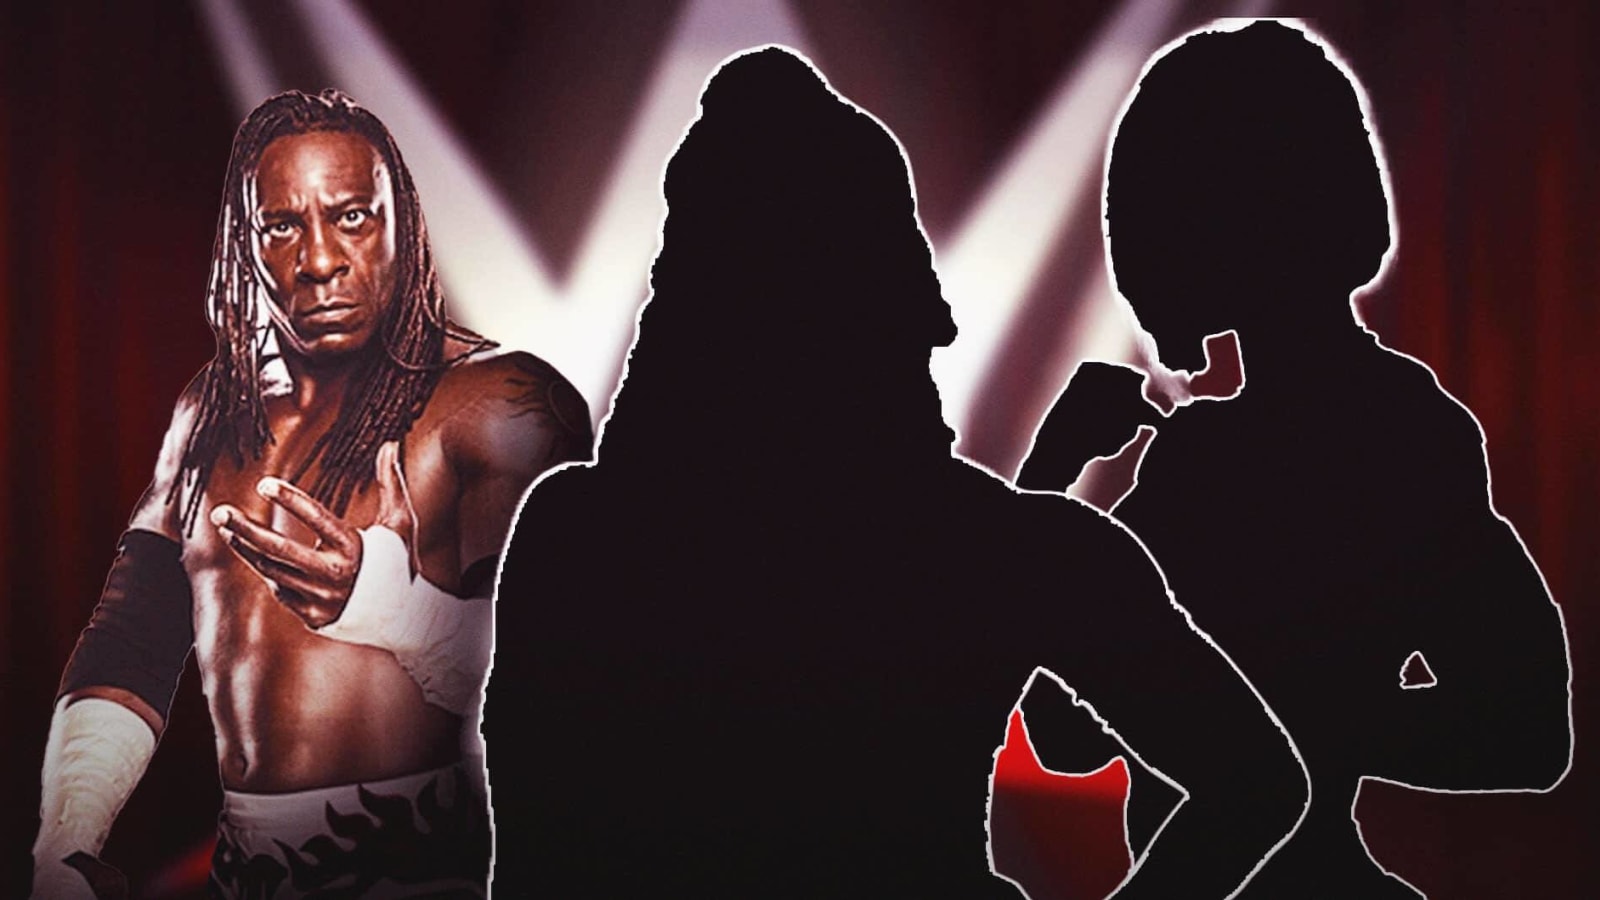 Booker T sees this group as the new Harlem Heat, even if he doesn’t want to manage them